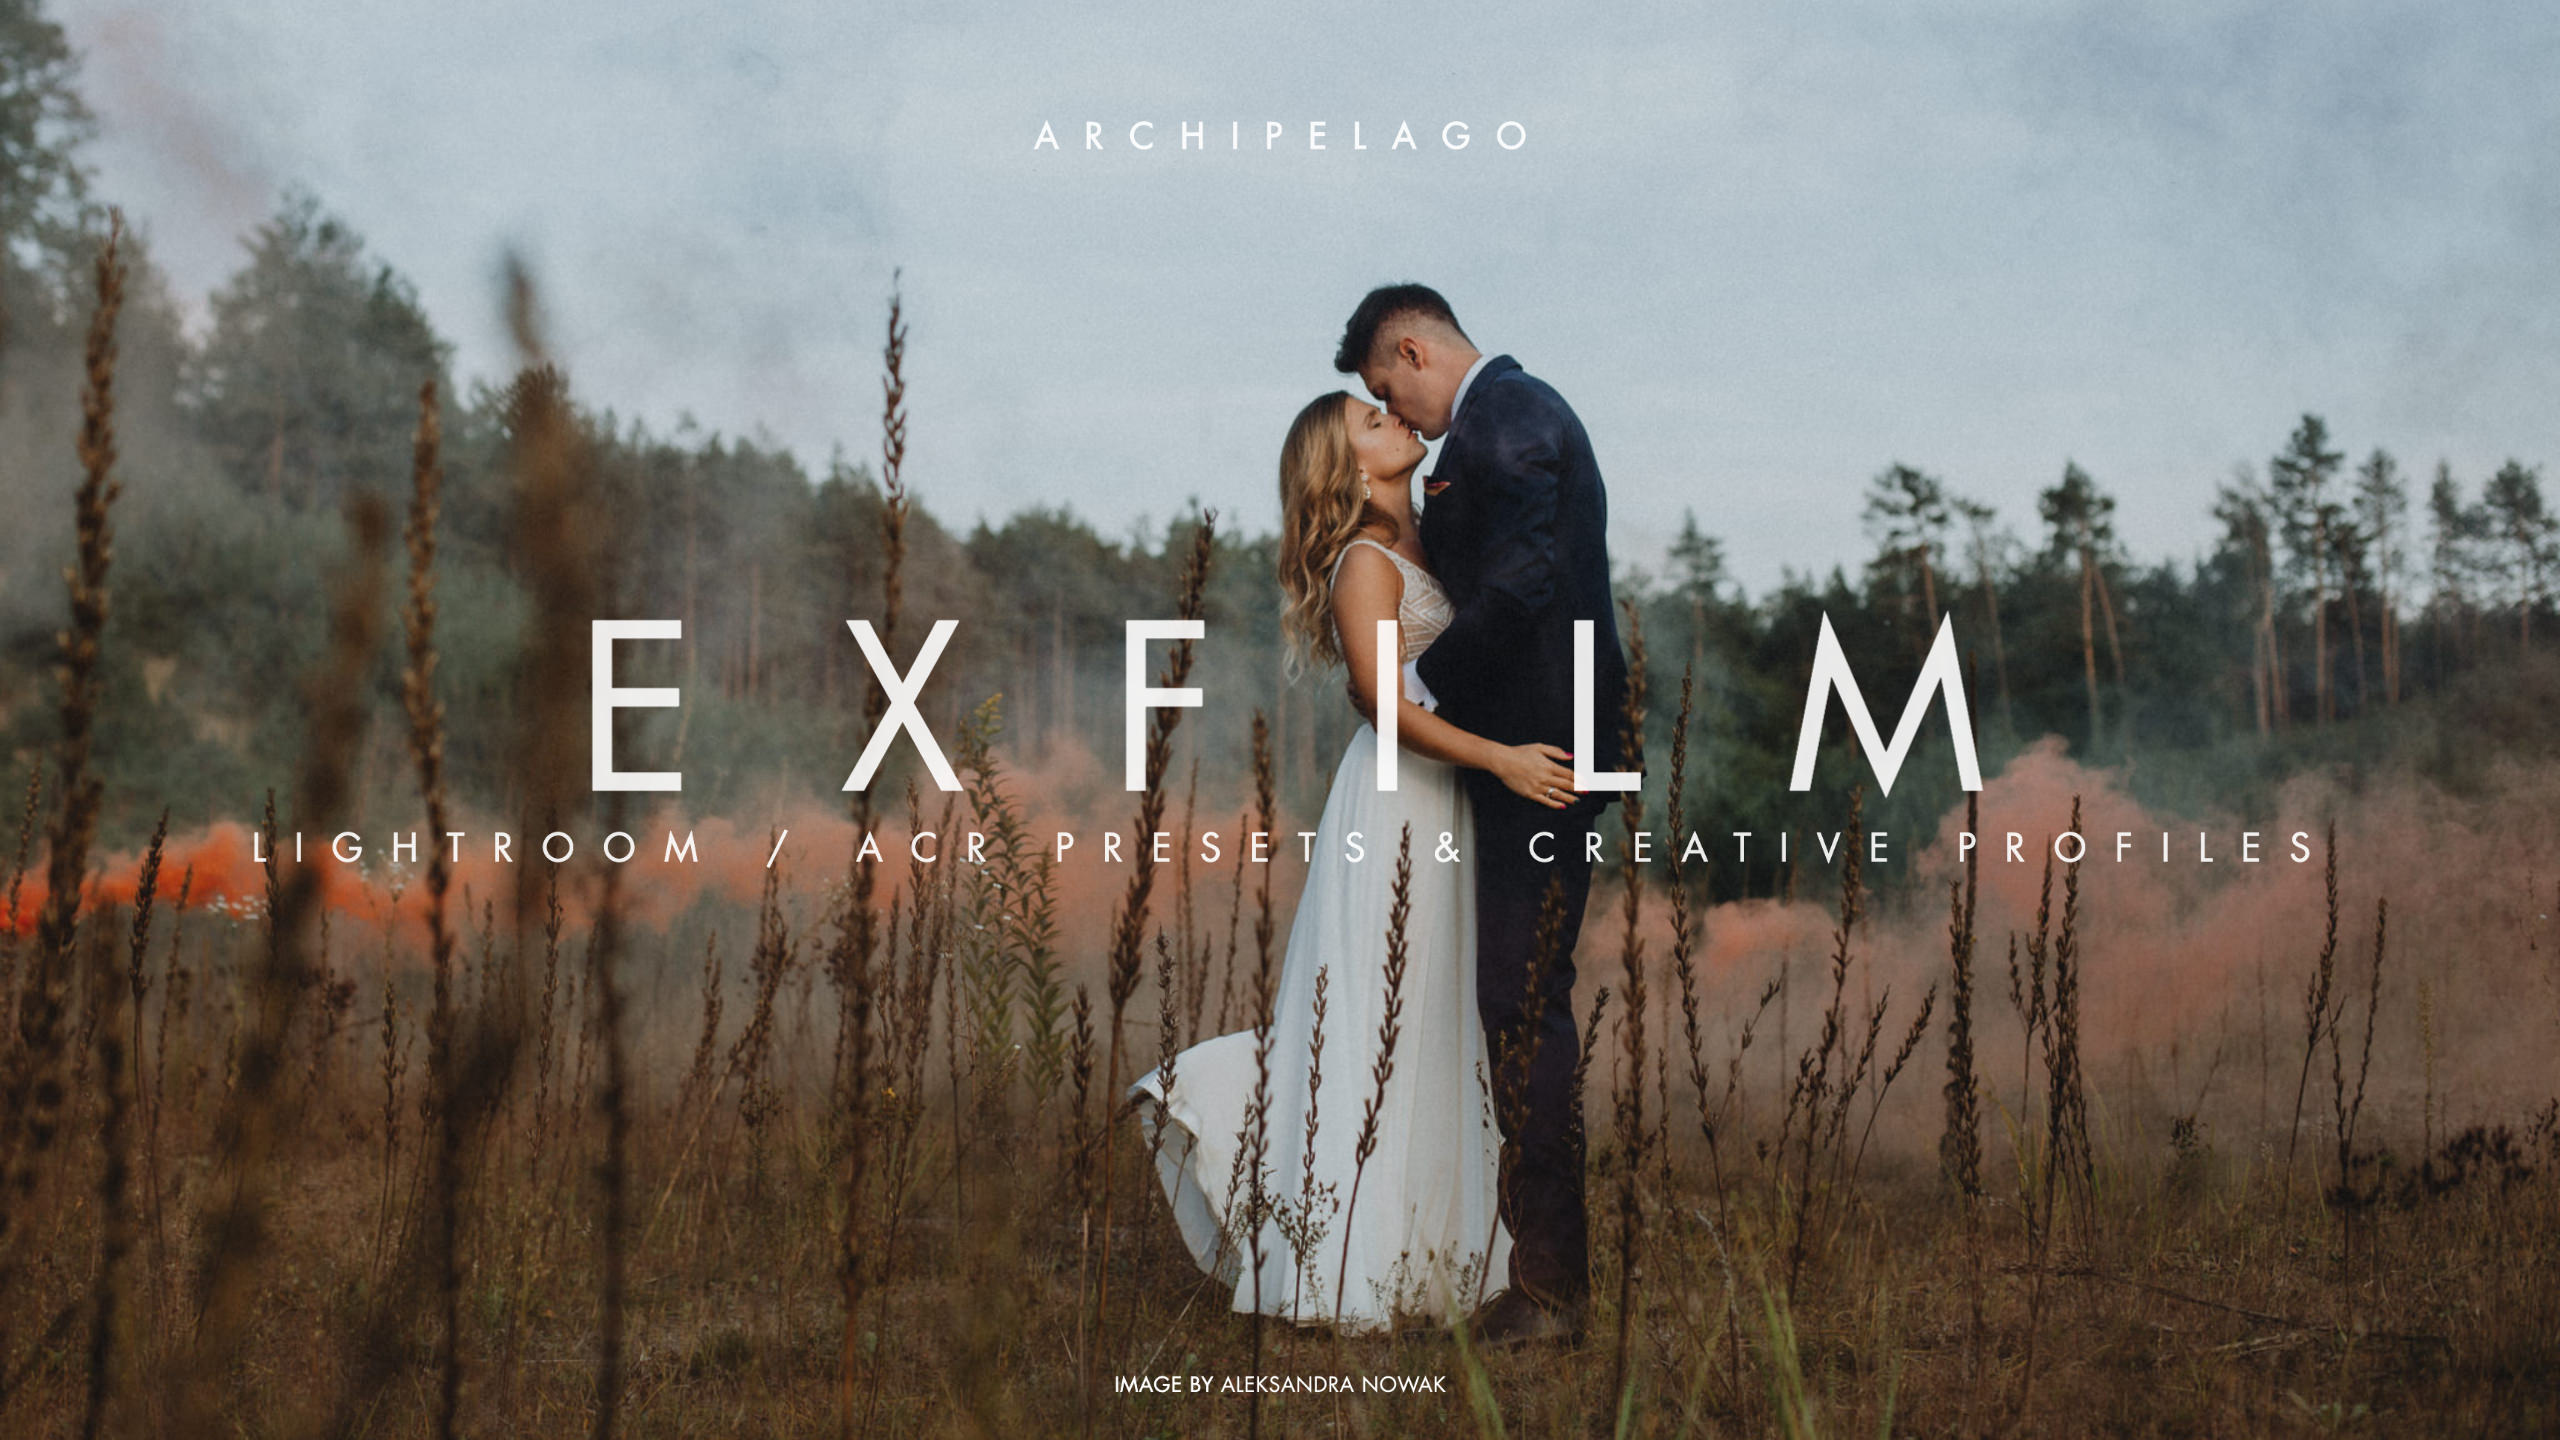 A bride and groom kiss in a field, an ad for exfilm archipelago presets for lightroom.